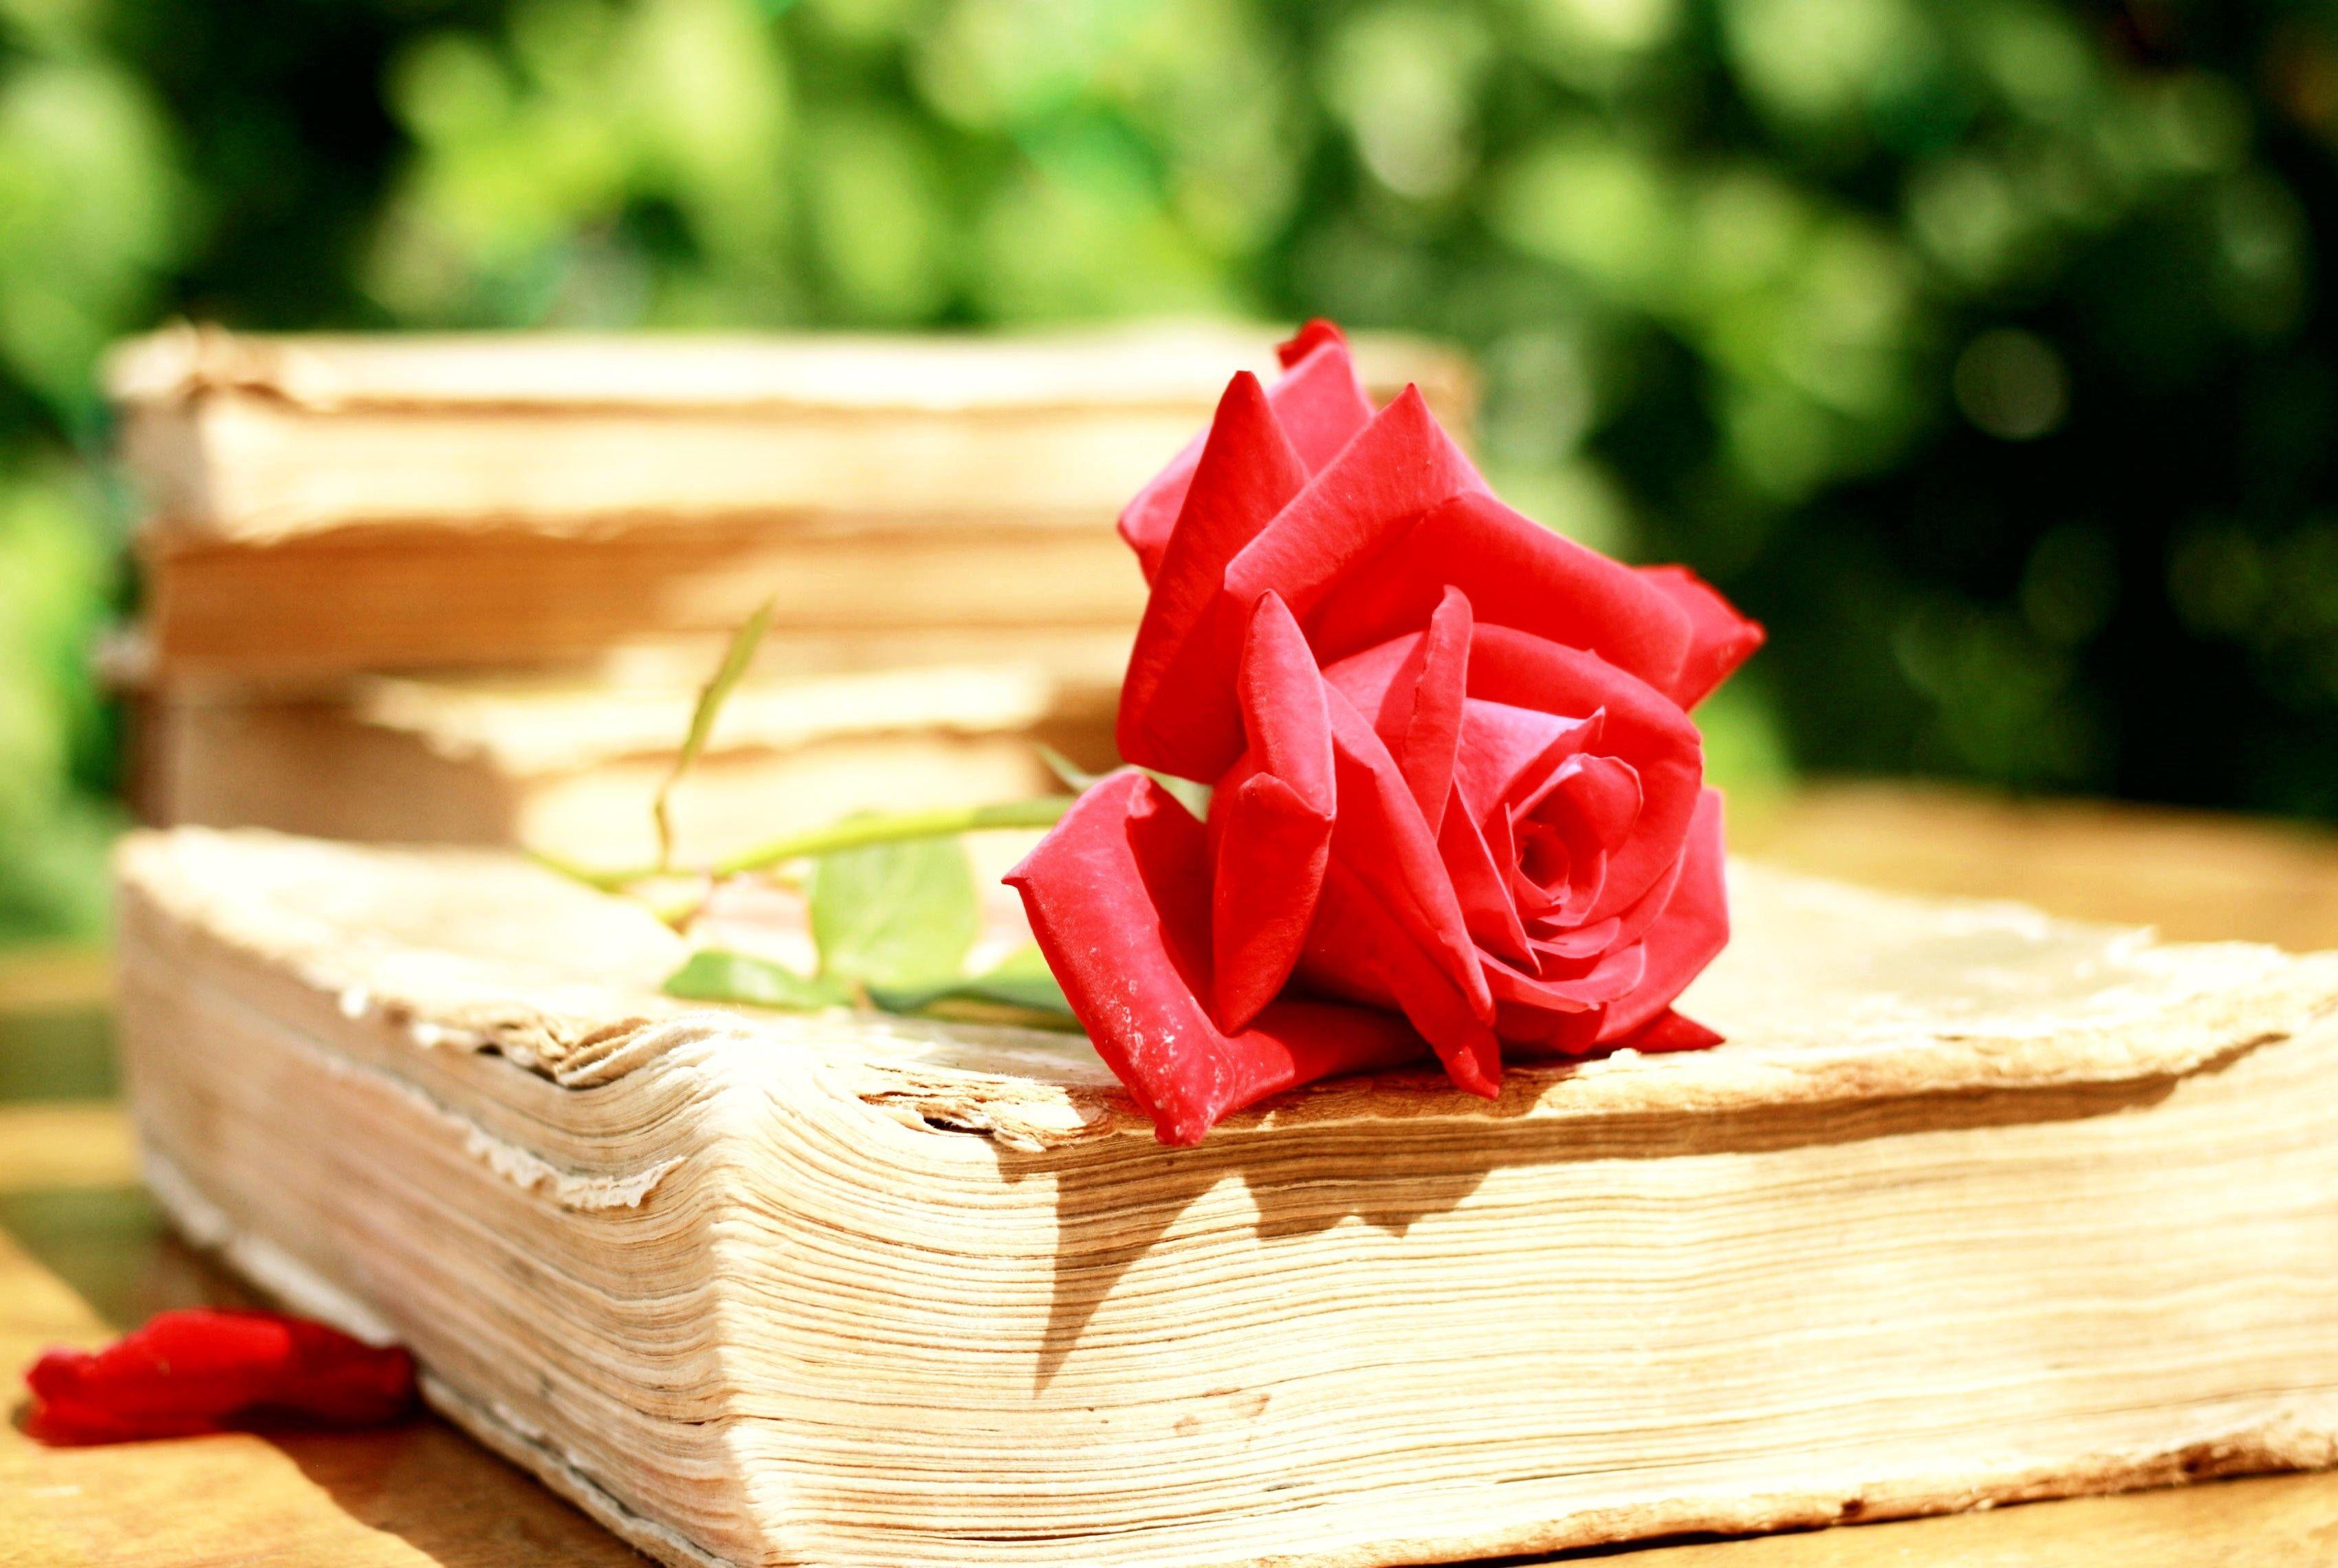 Red rose on old book Wallpaper download 3400x2280 pixel Flowers